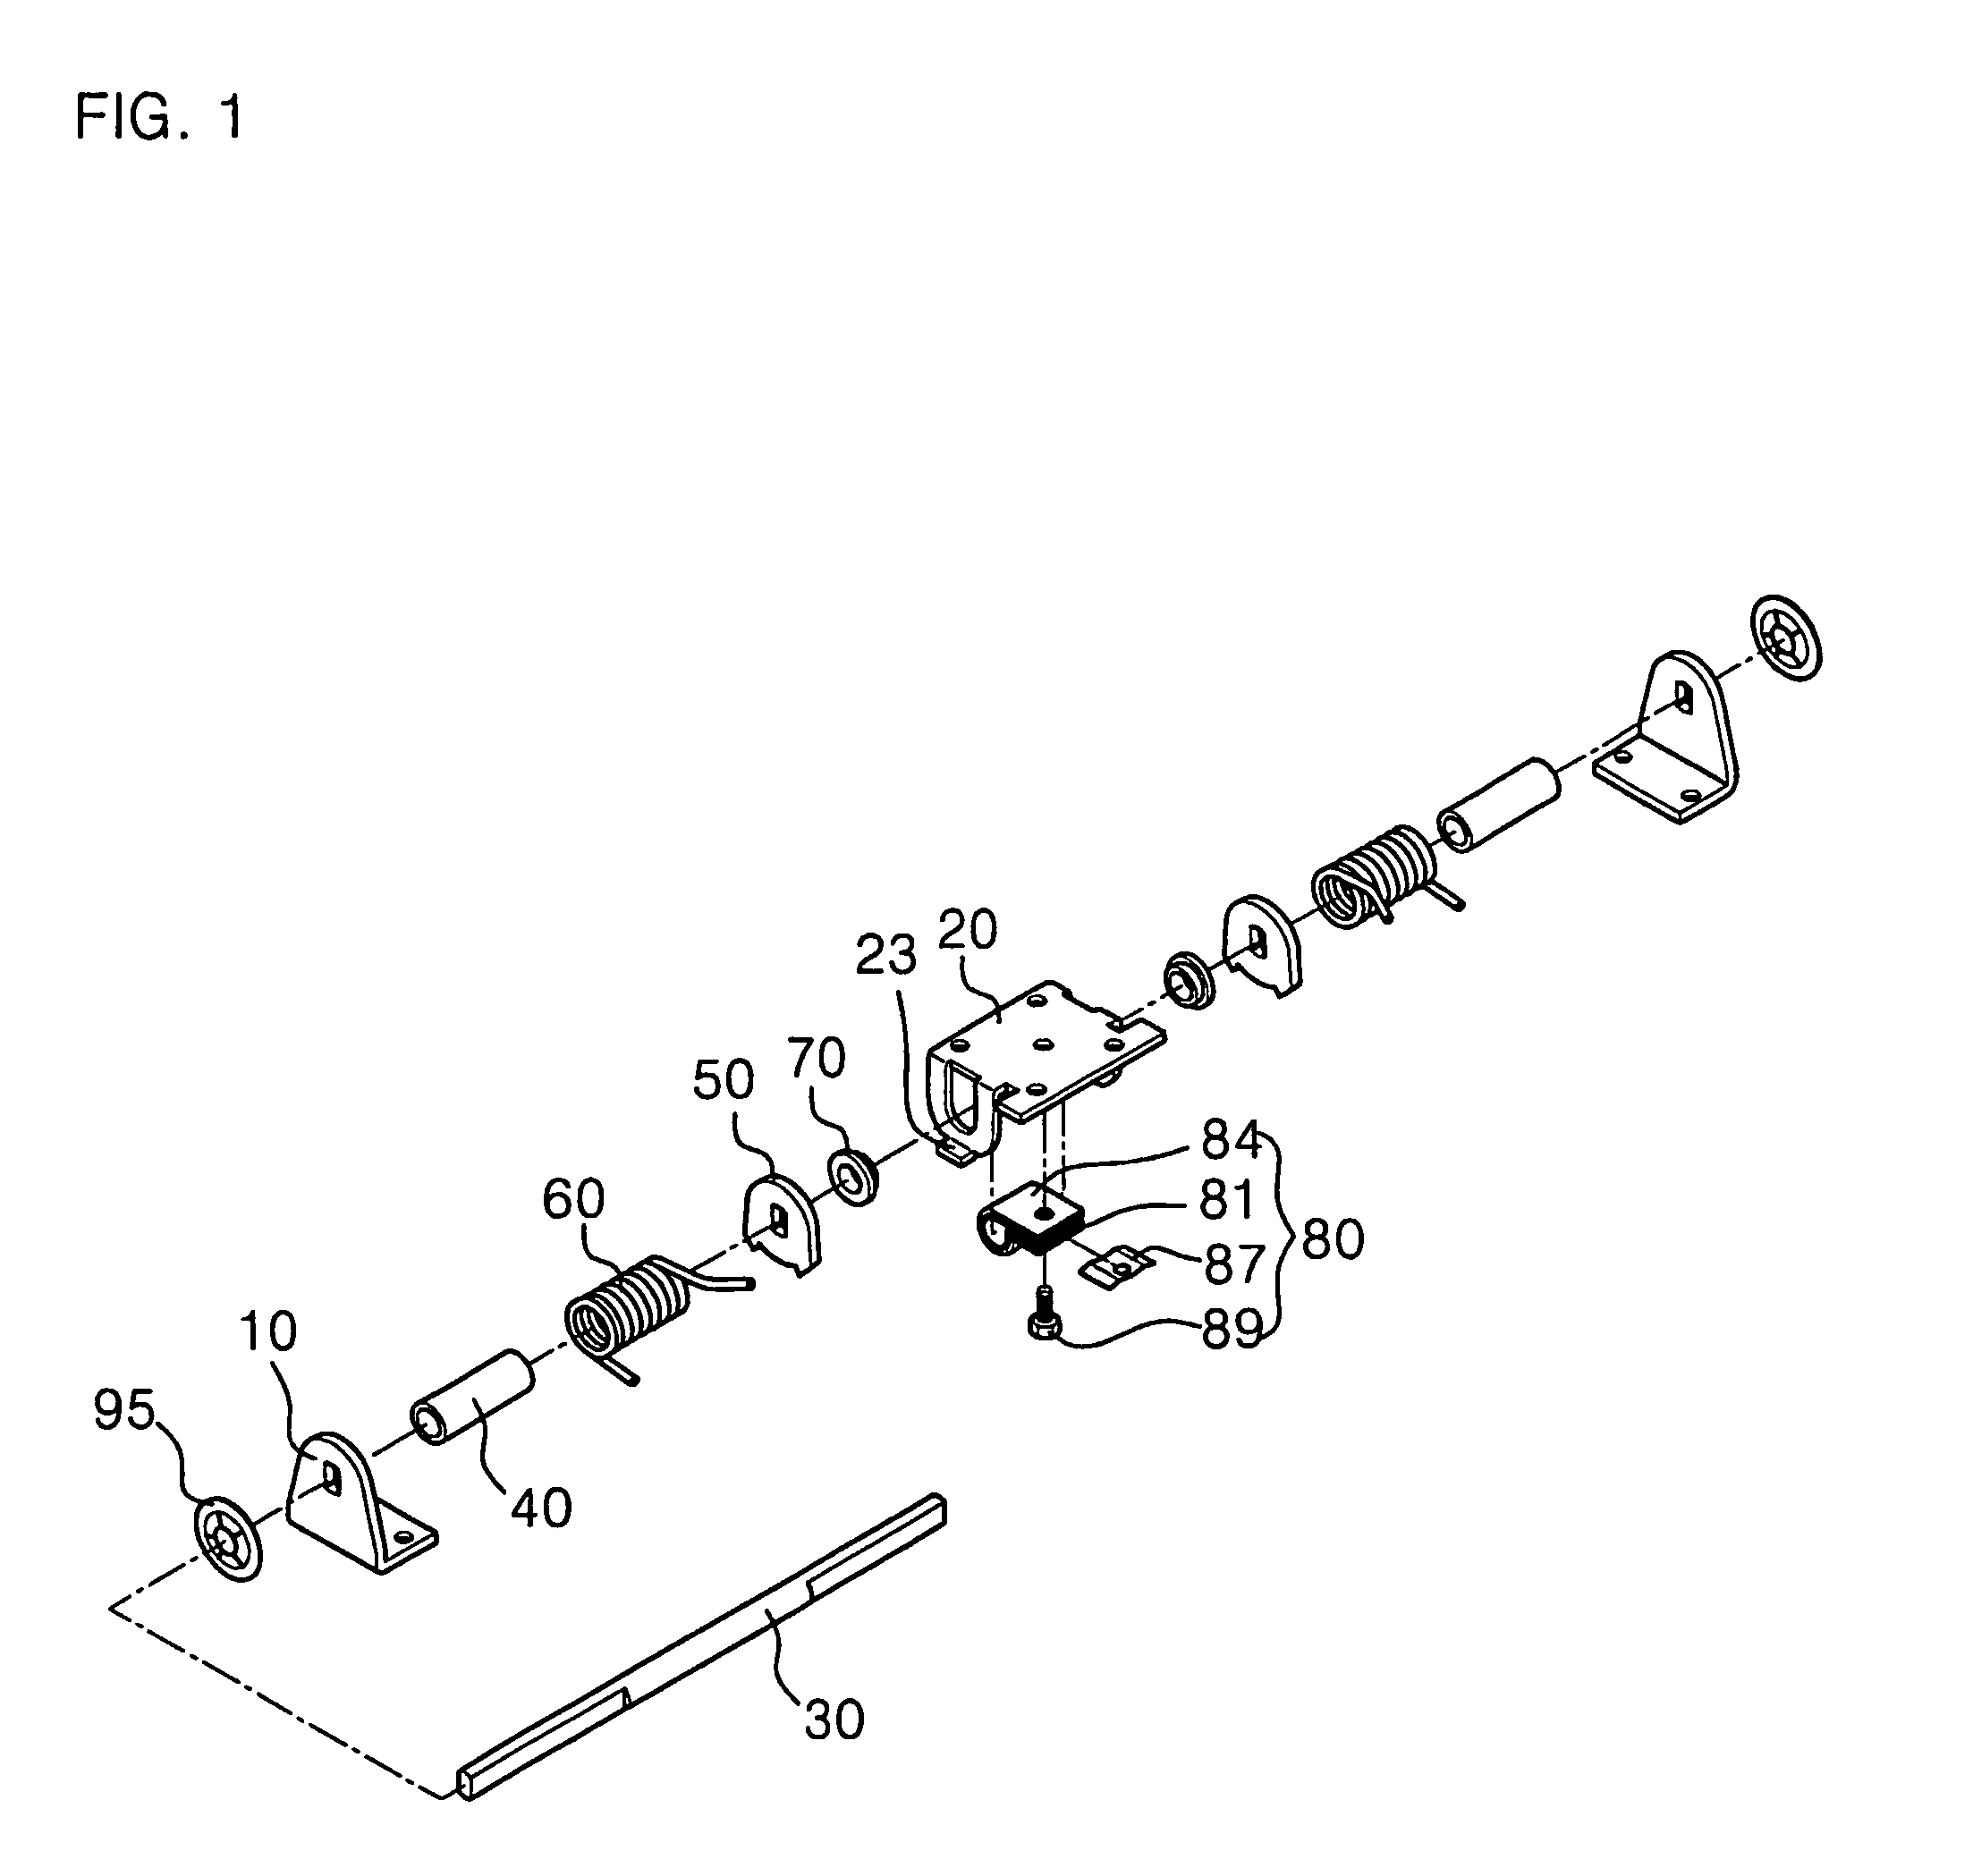 Hinge structure for flat visual display device